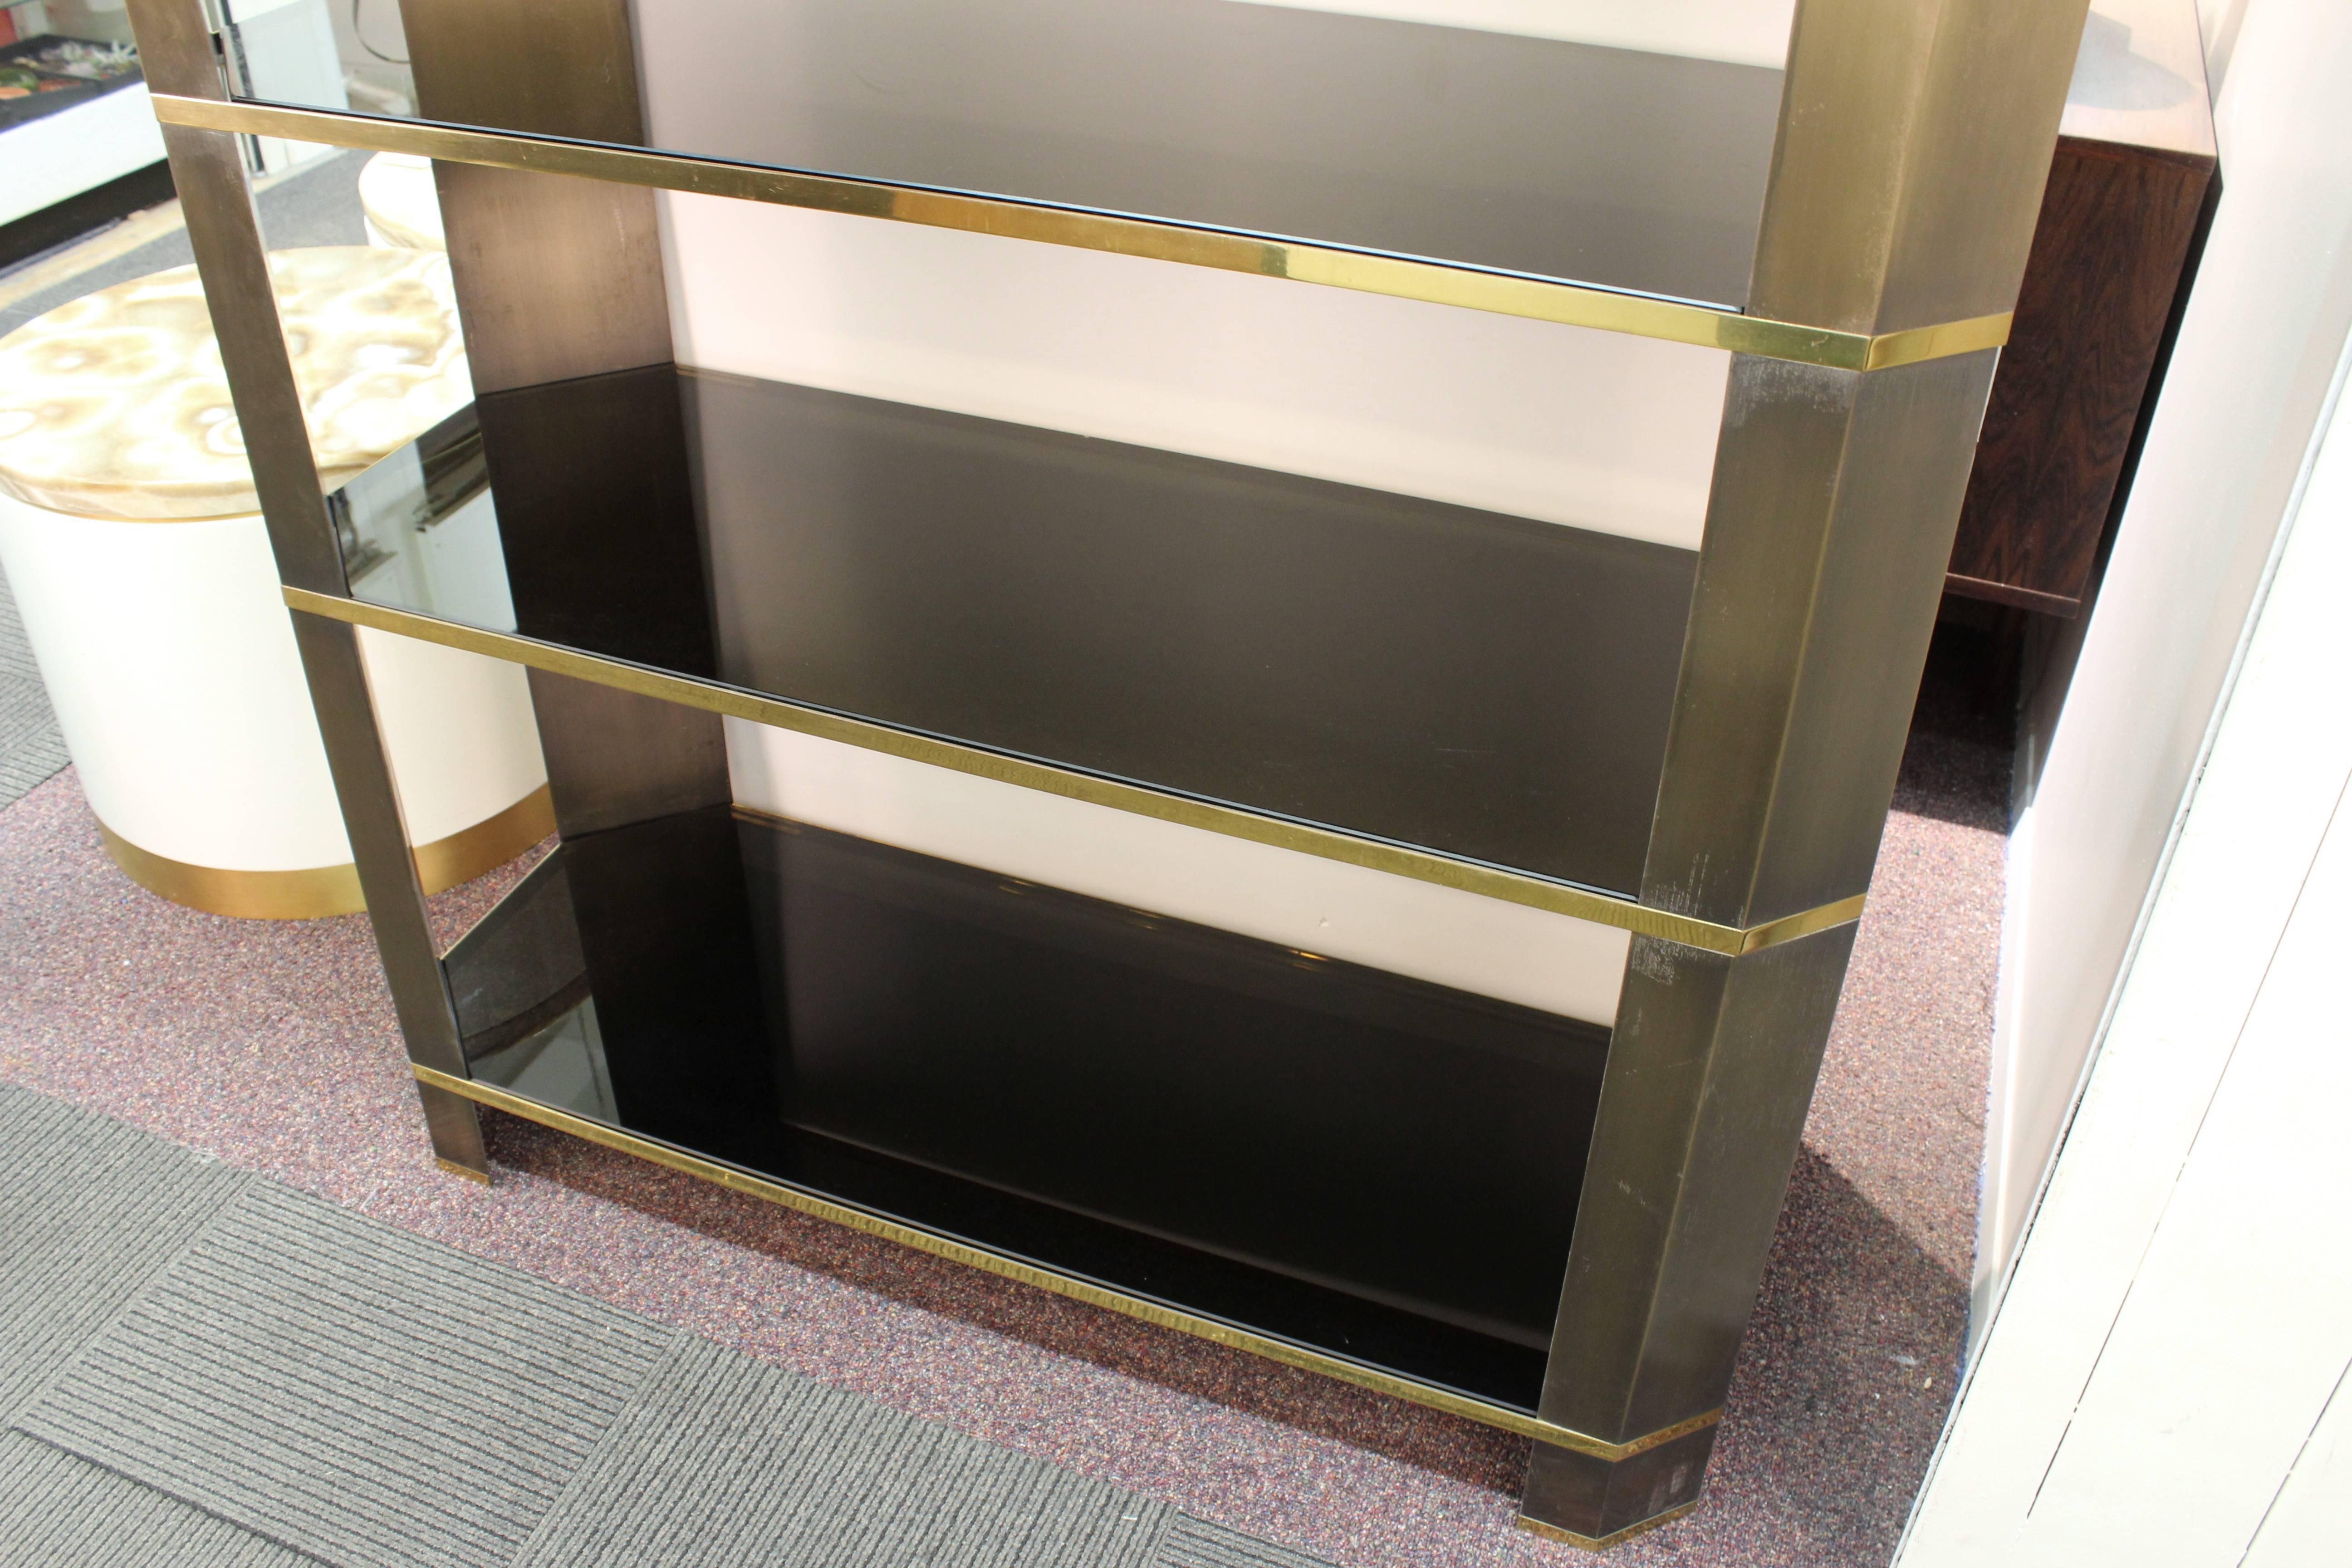 A monumental sized etagere with a bronze structure and shelves made of thick smoked glass, possibly made in the 1970's. The piece has a few scratches but is in overall good vintage condition, with age appropriate use.